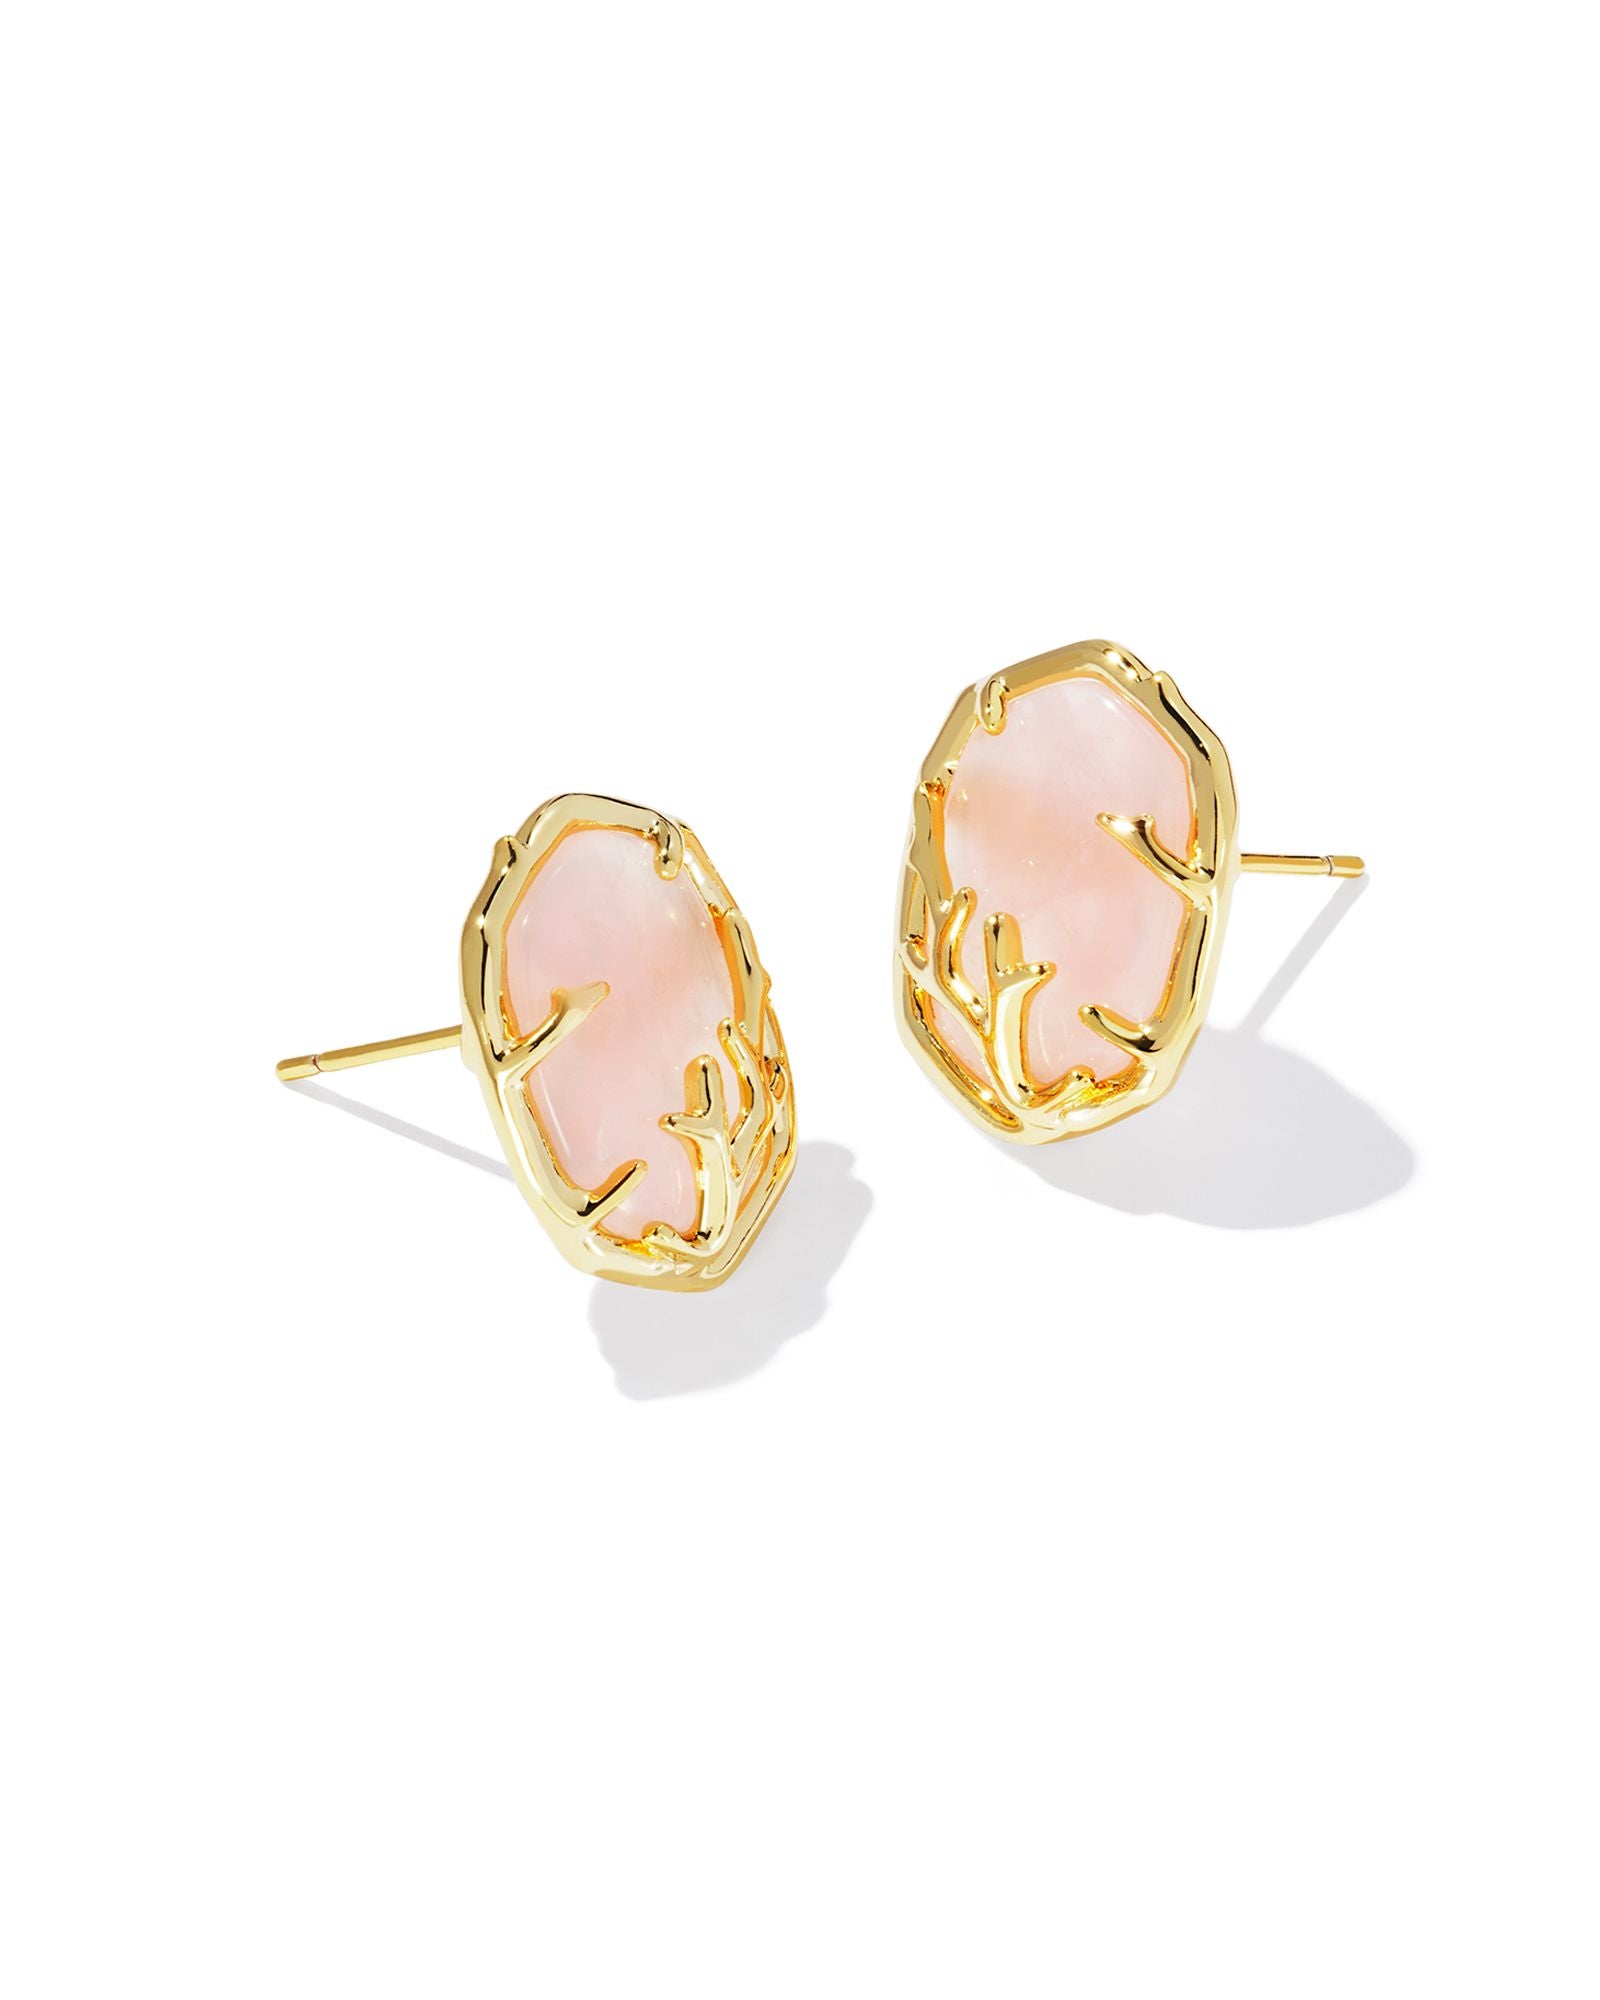 Kendra Scott | Daphne Gold Coral Frame Stud Earrings in Rose Quartz - Giddy Up Glamour Boutique